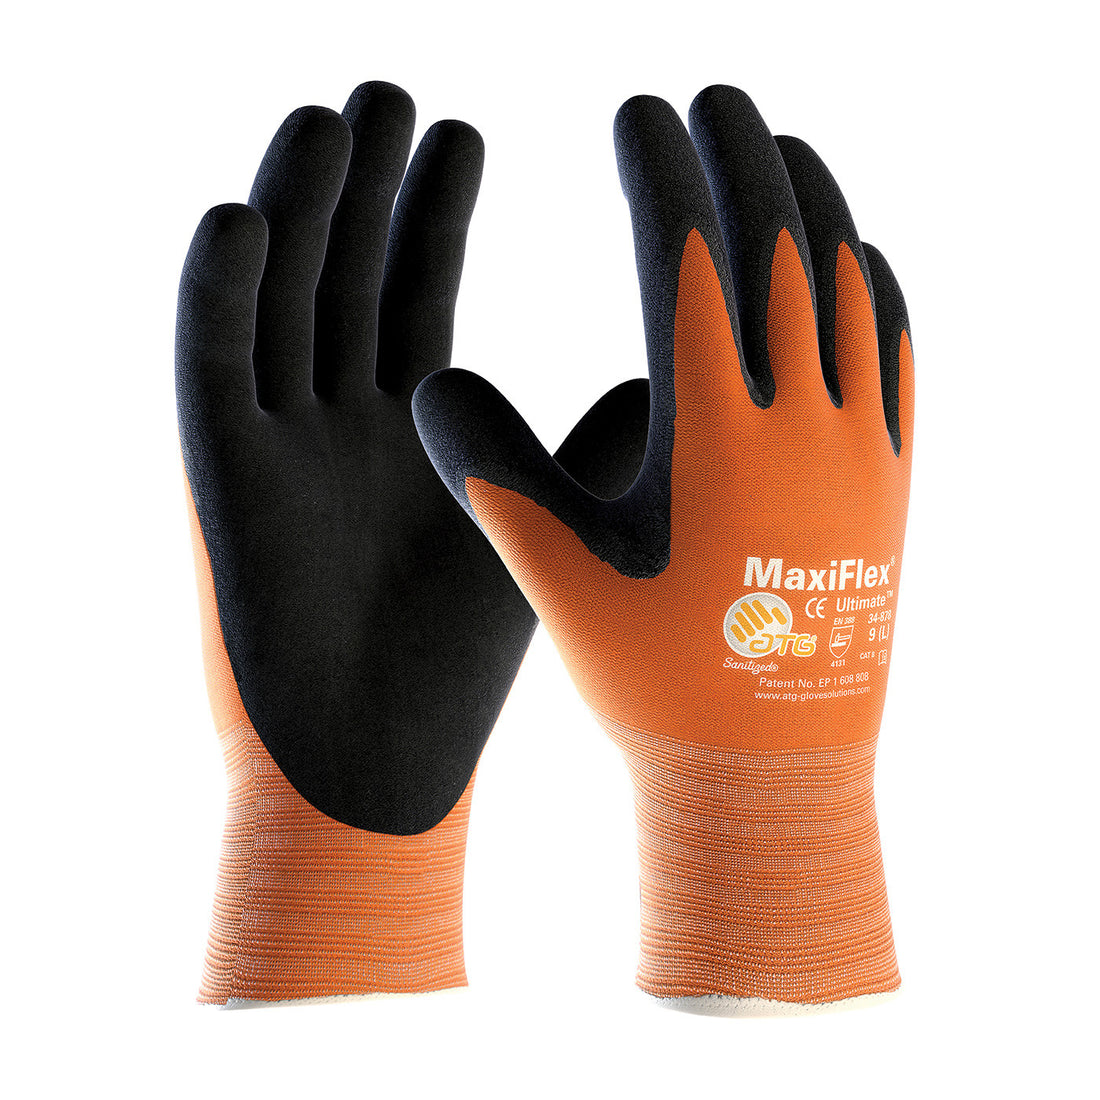 Best Gloves for Package Handlers